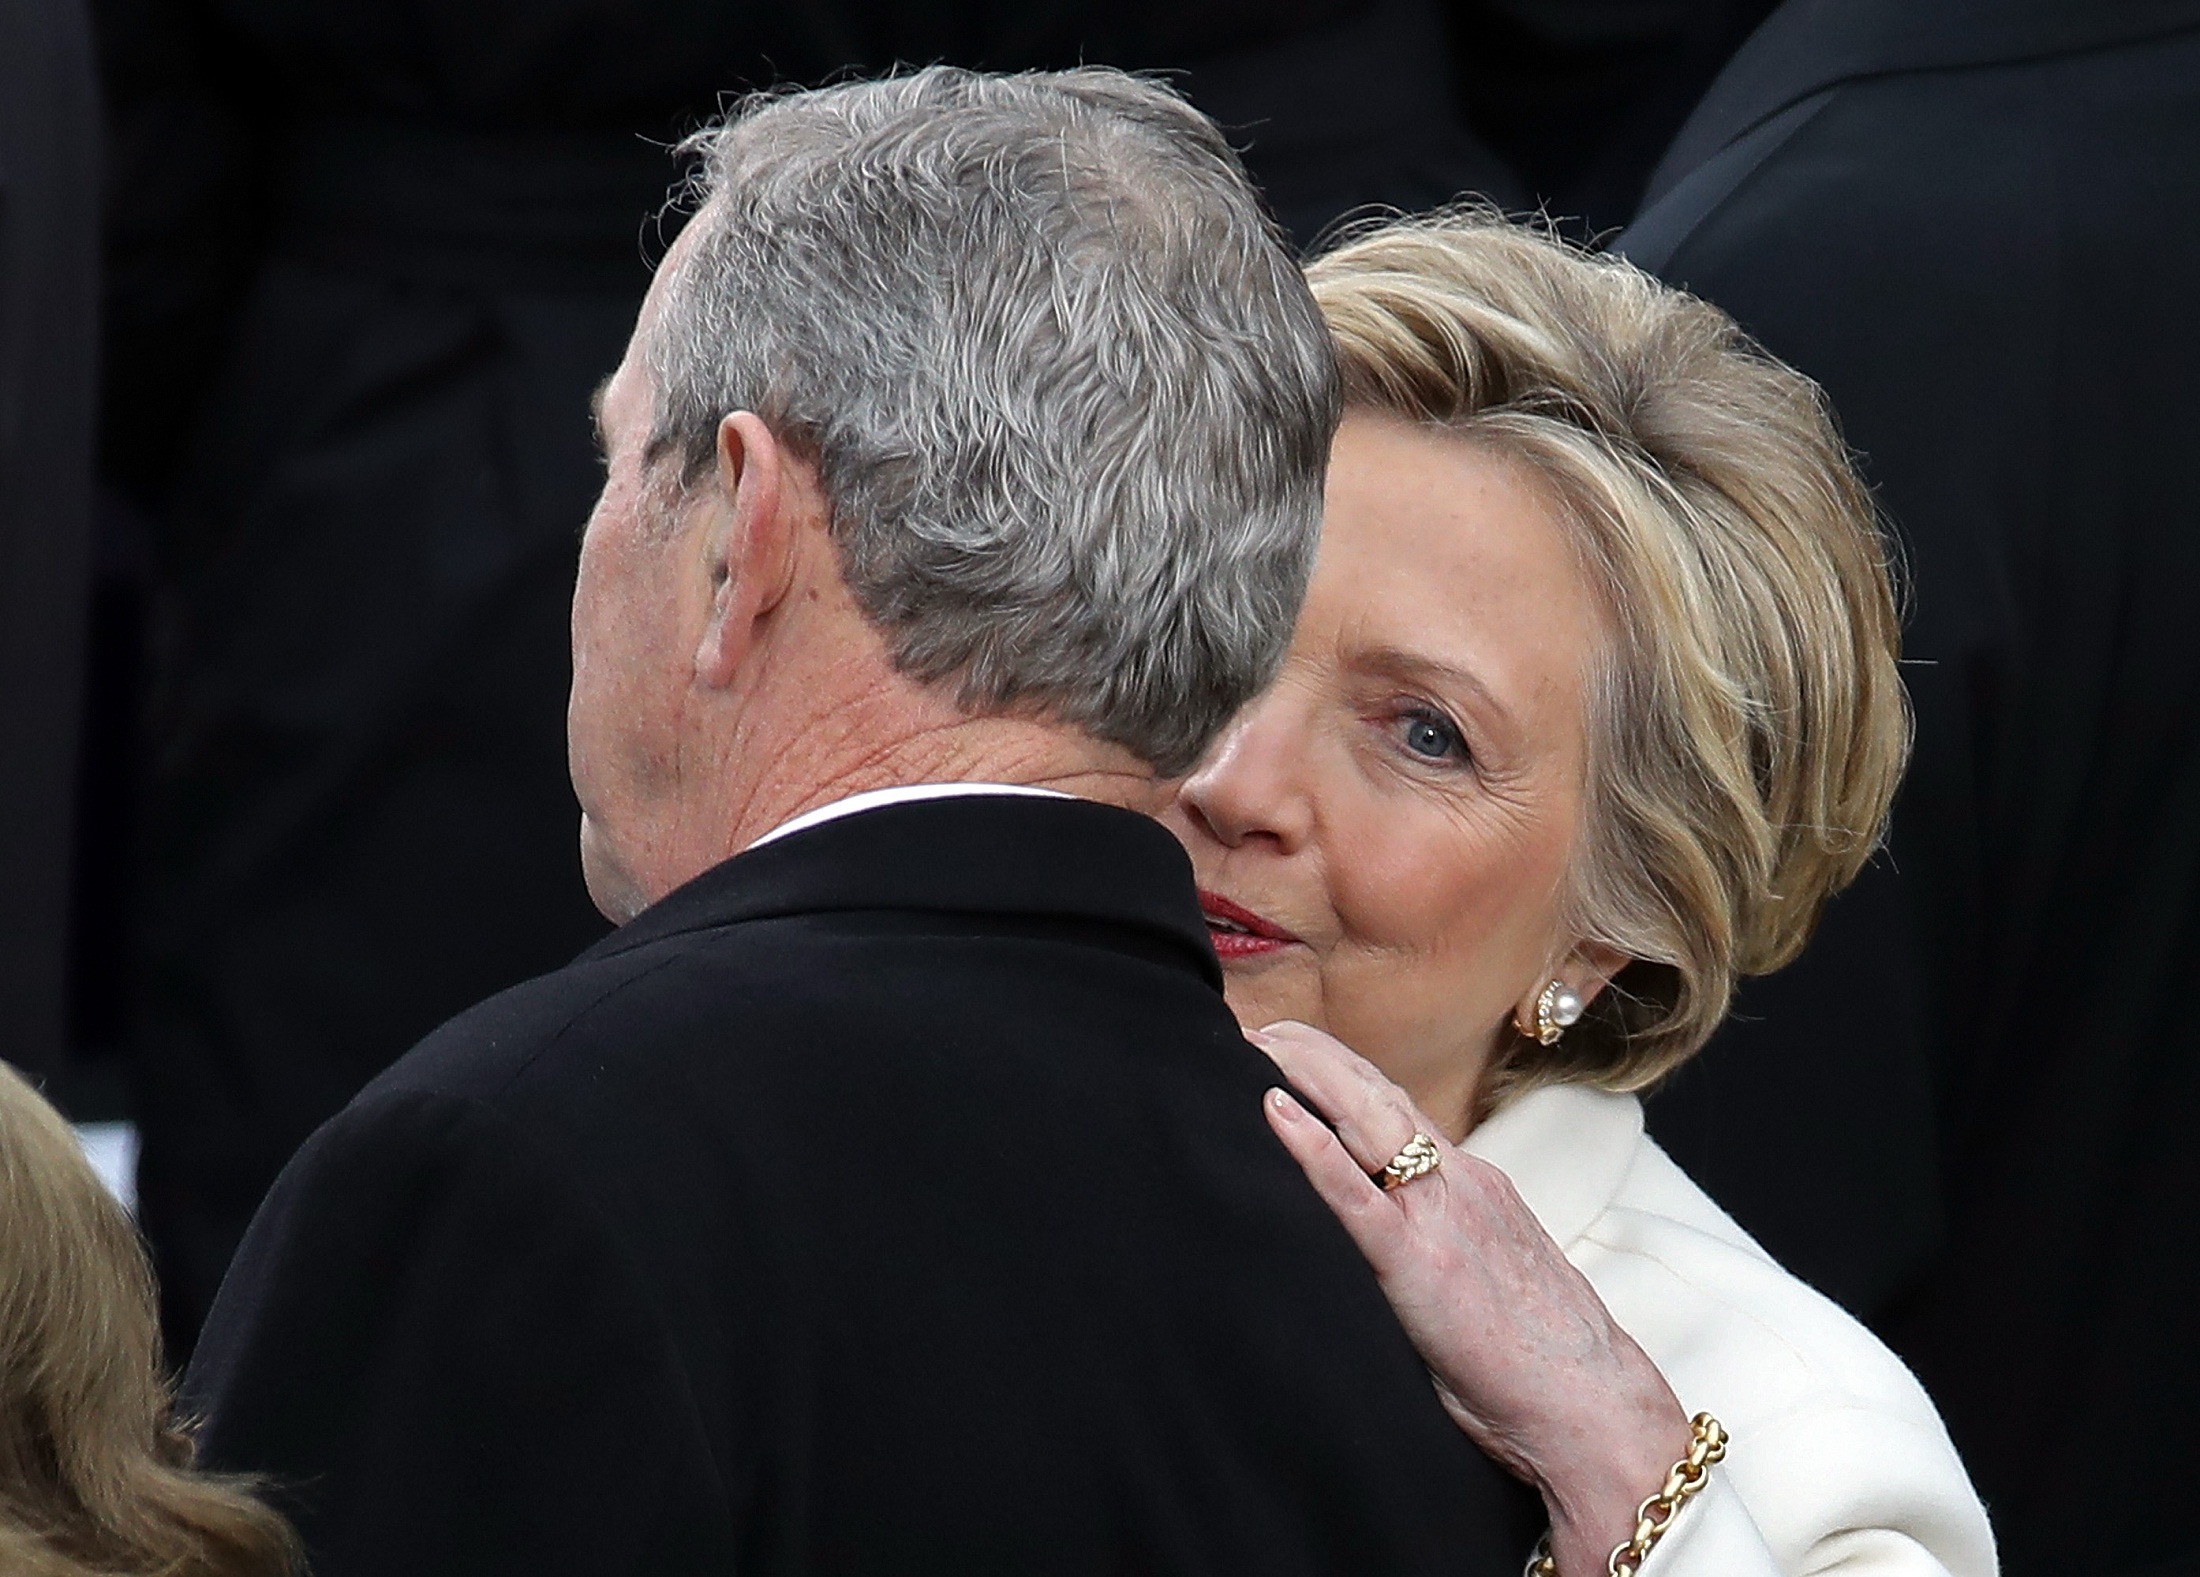 WASHINGTON, DC - JANUARY 20: Former Democratic presidential nominee Hillary Clinton (R) talks to former President George W. Bush arrives on the West Front of the U.S. Capitol on January 20, 2017 in Washington, DC. In today's inauguration ceremony Donald J. Trump becomes the 45th president of the United States.   Drew Angerer/Getty Images/AFP